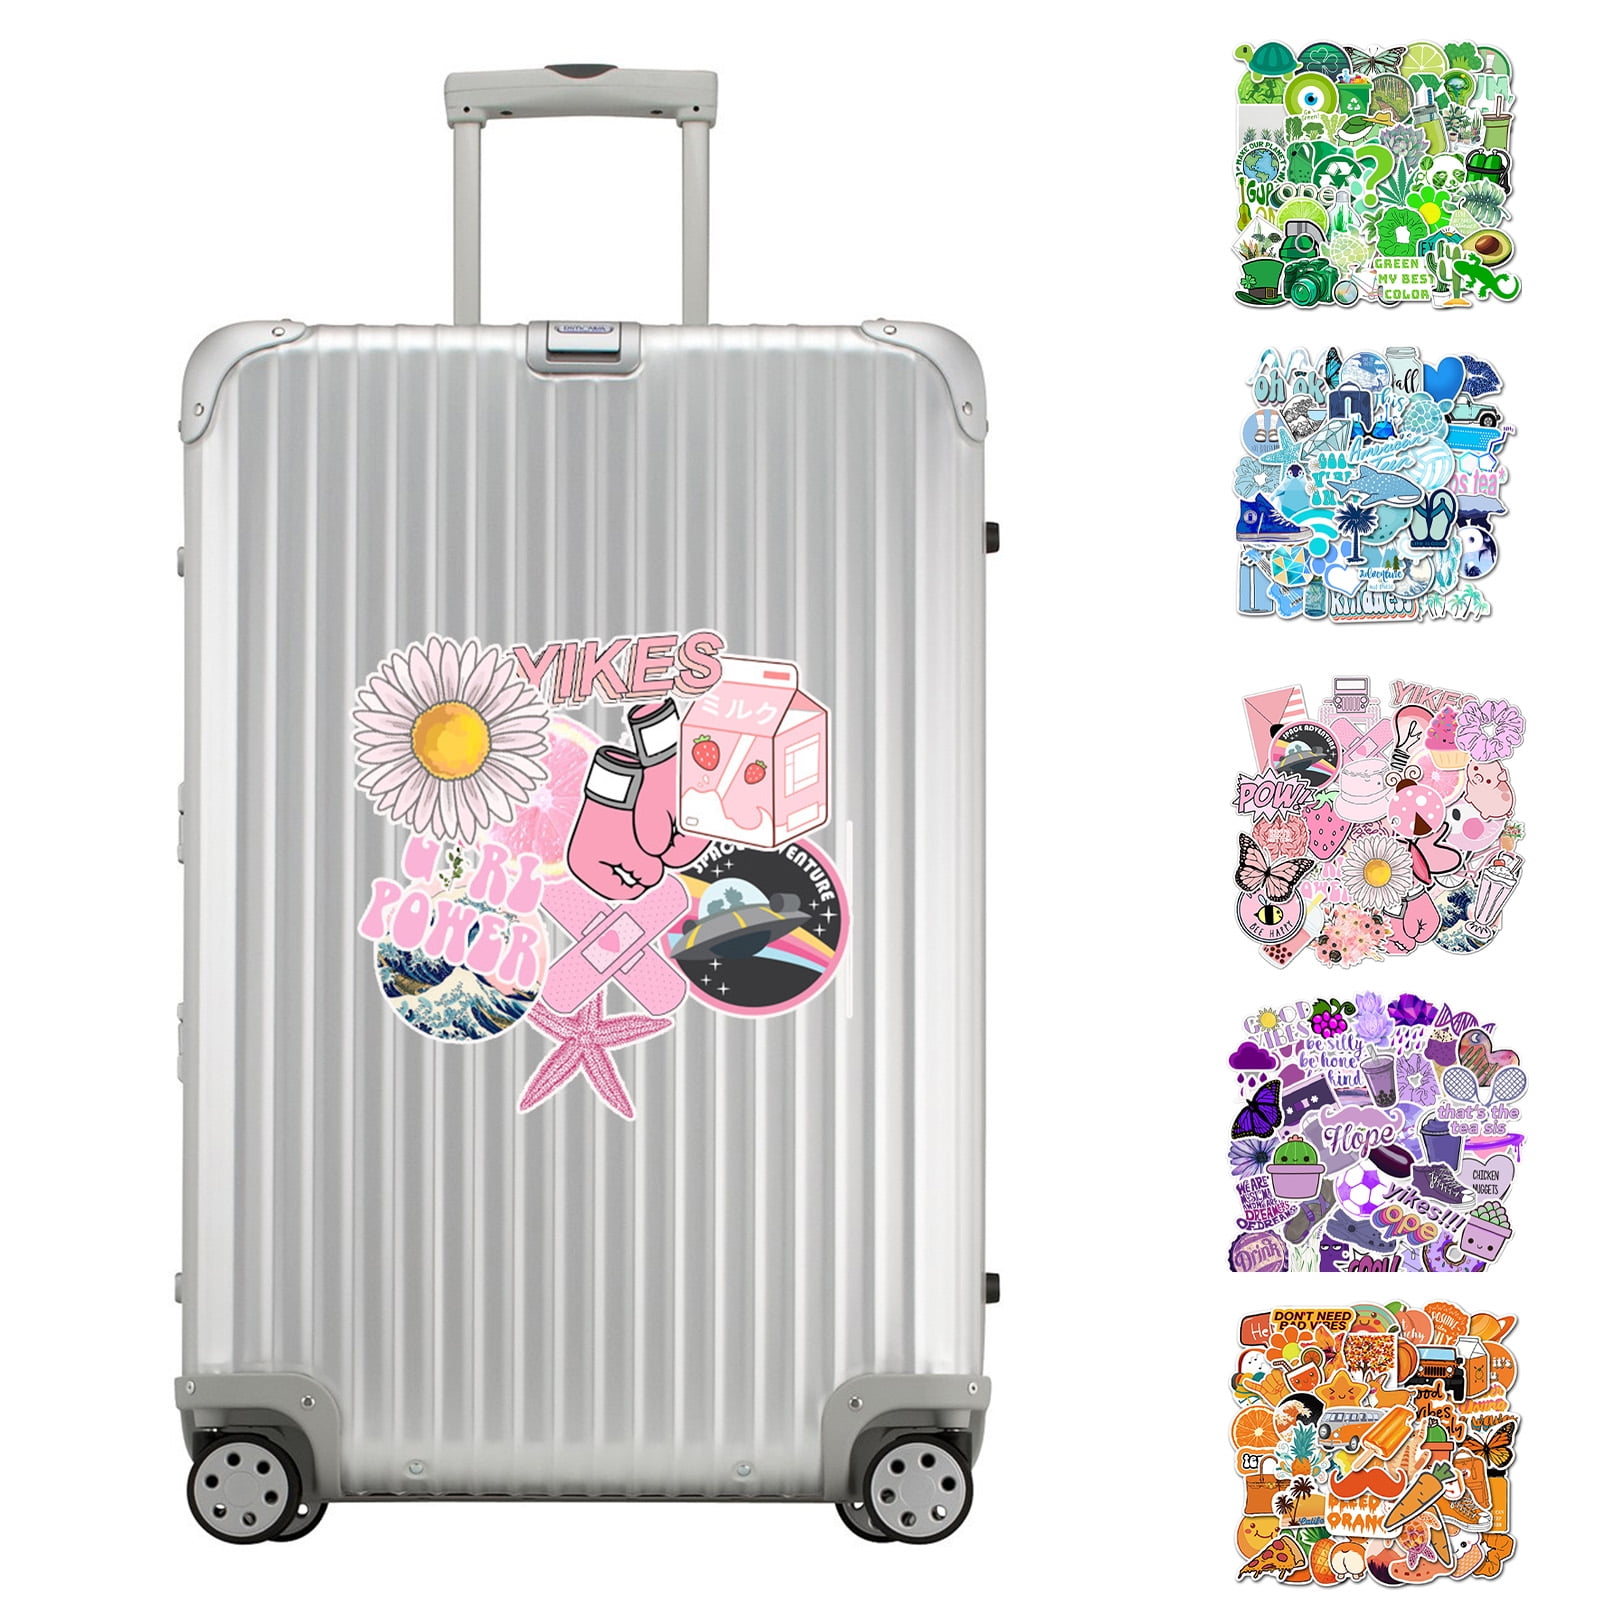 50pc Colorful Crystal Stickers for Guitar Phone Laptop Luggage Suitcase  Graffiti